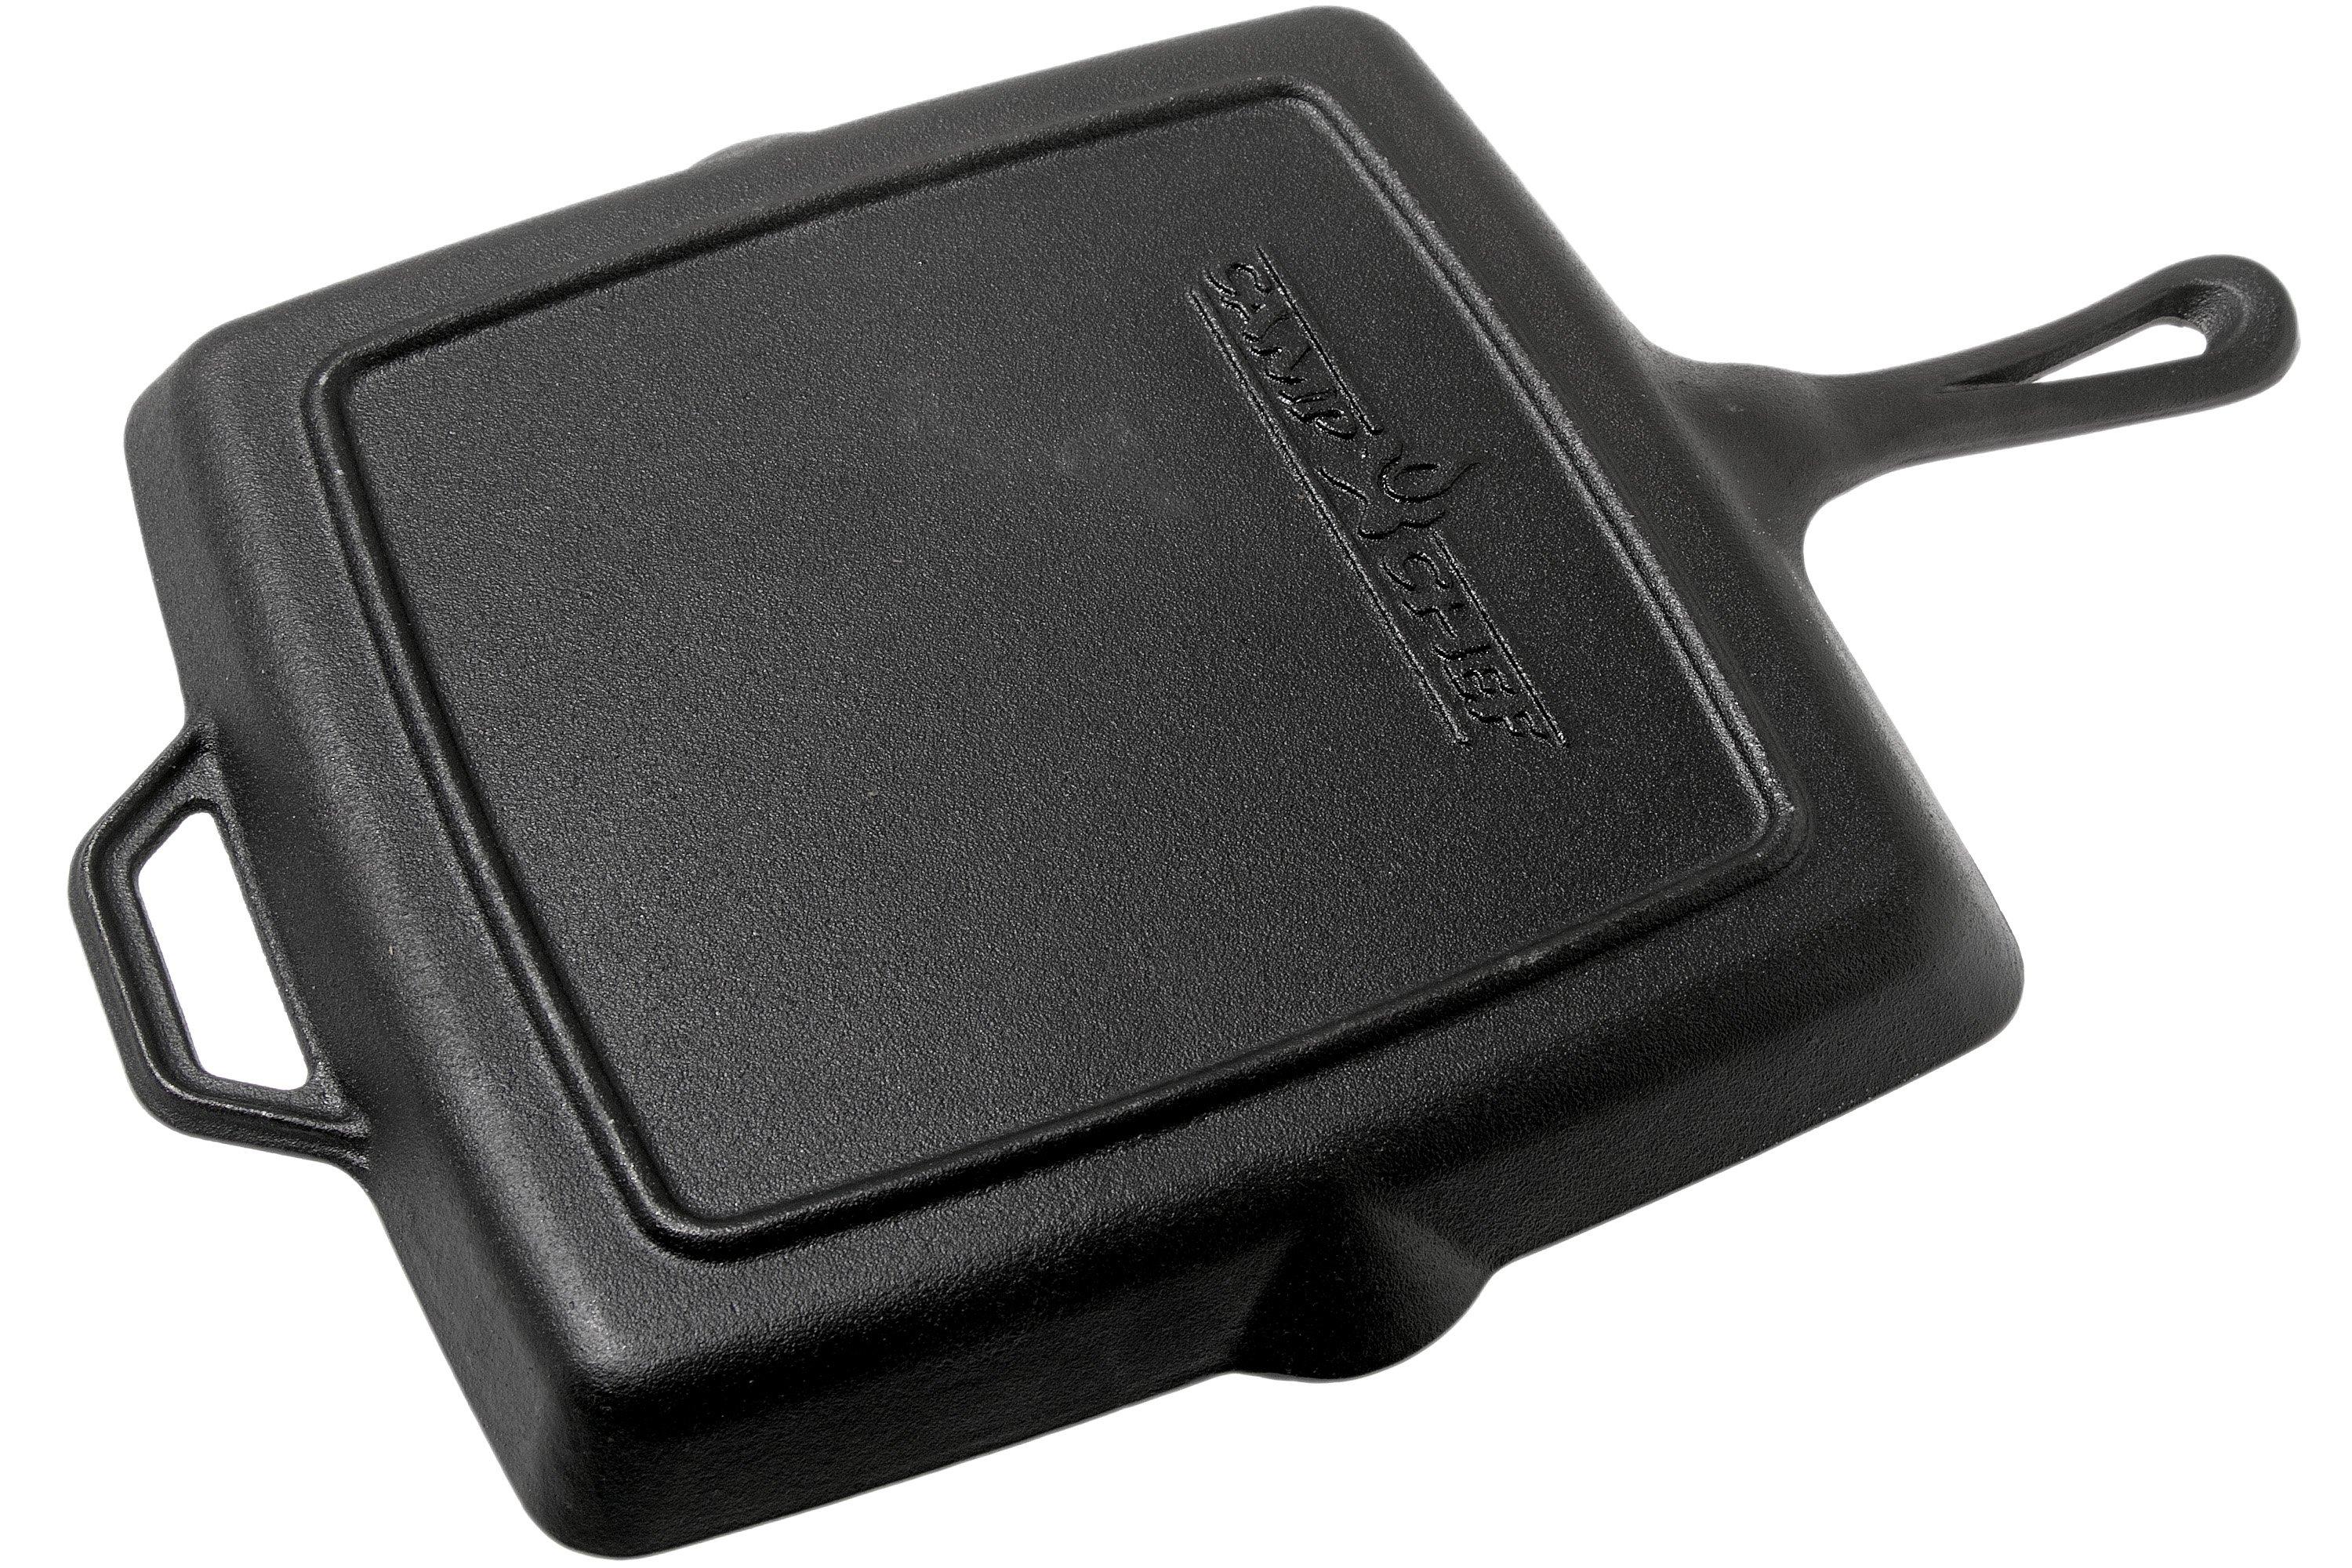 Camp Chef Square cast iron pan  Advantageously shopping at